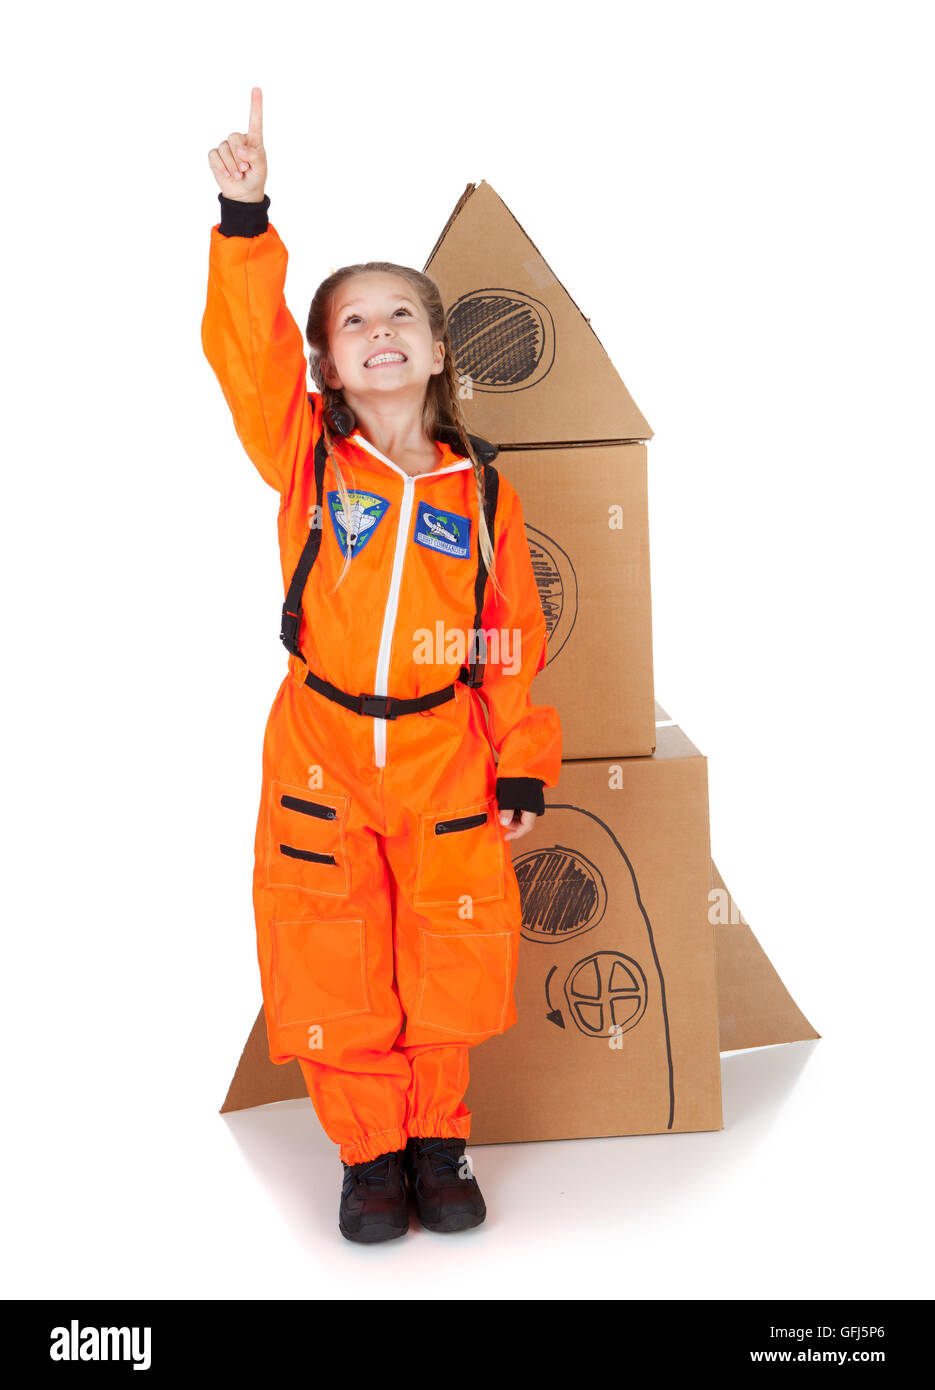 Little girl costumed as an Astronaut.  Isolated on white background. Stock Photo